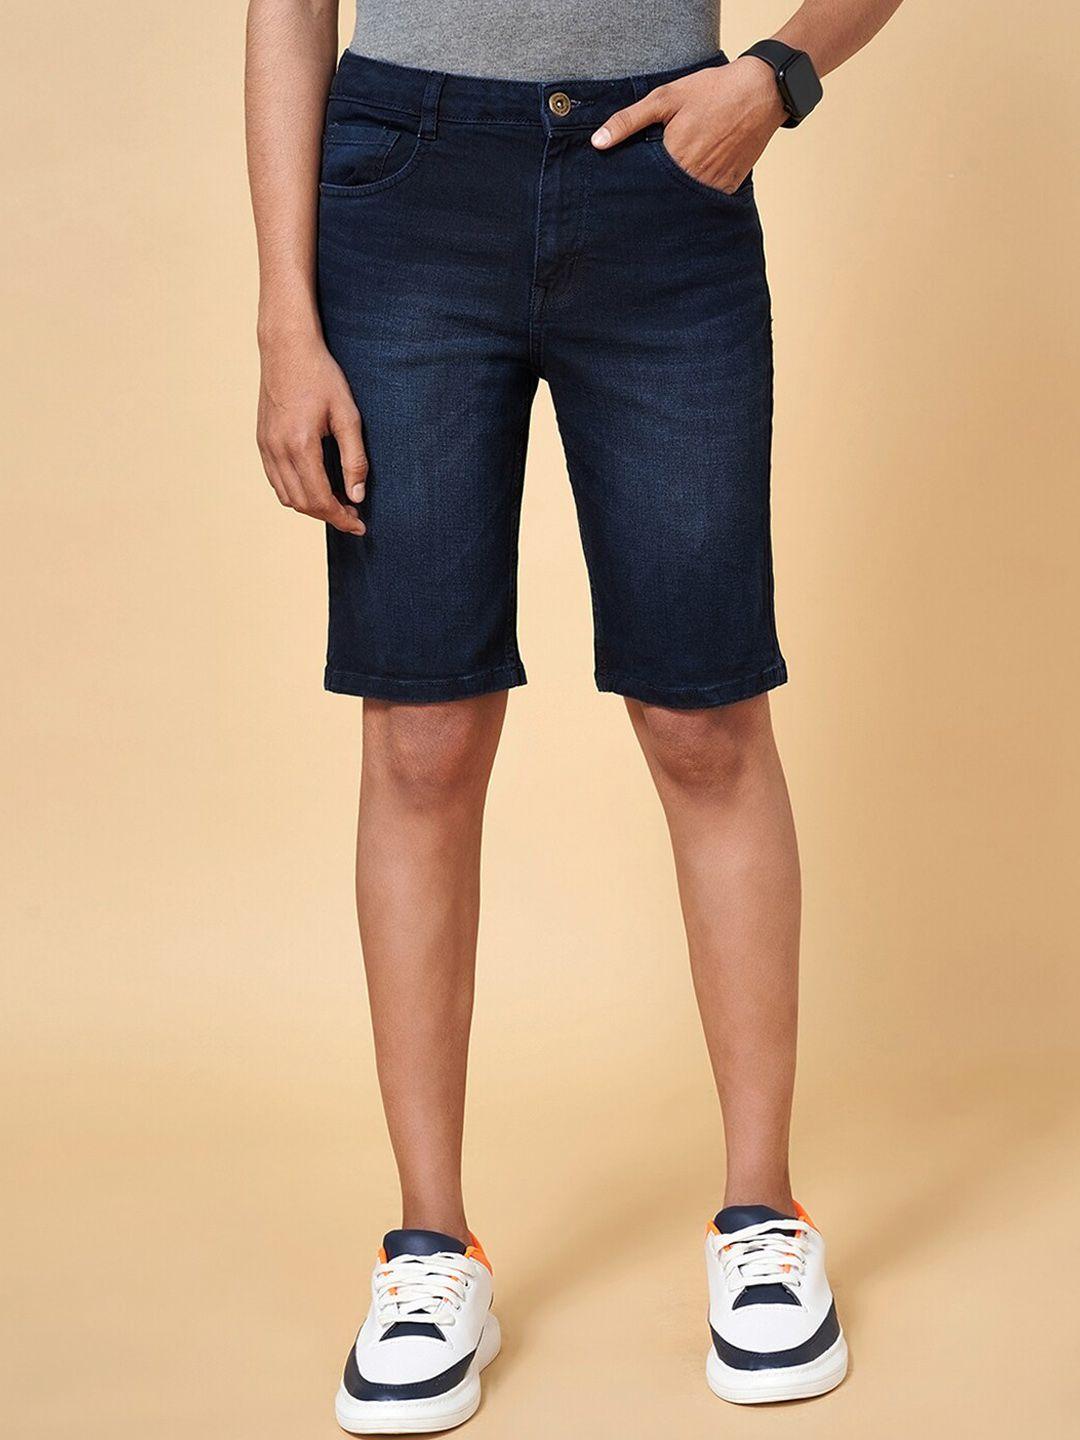 coolsters by pantaloons boys blue washed denim shorts technology